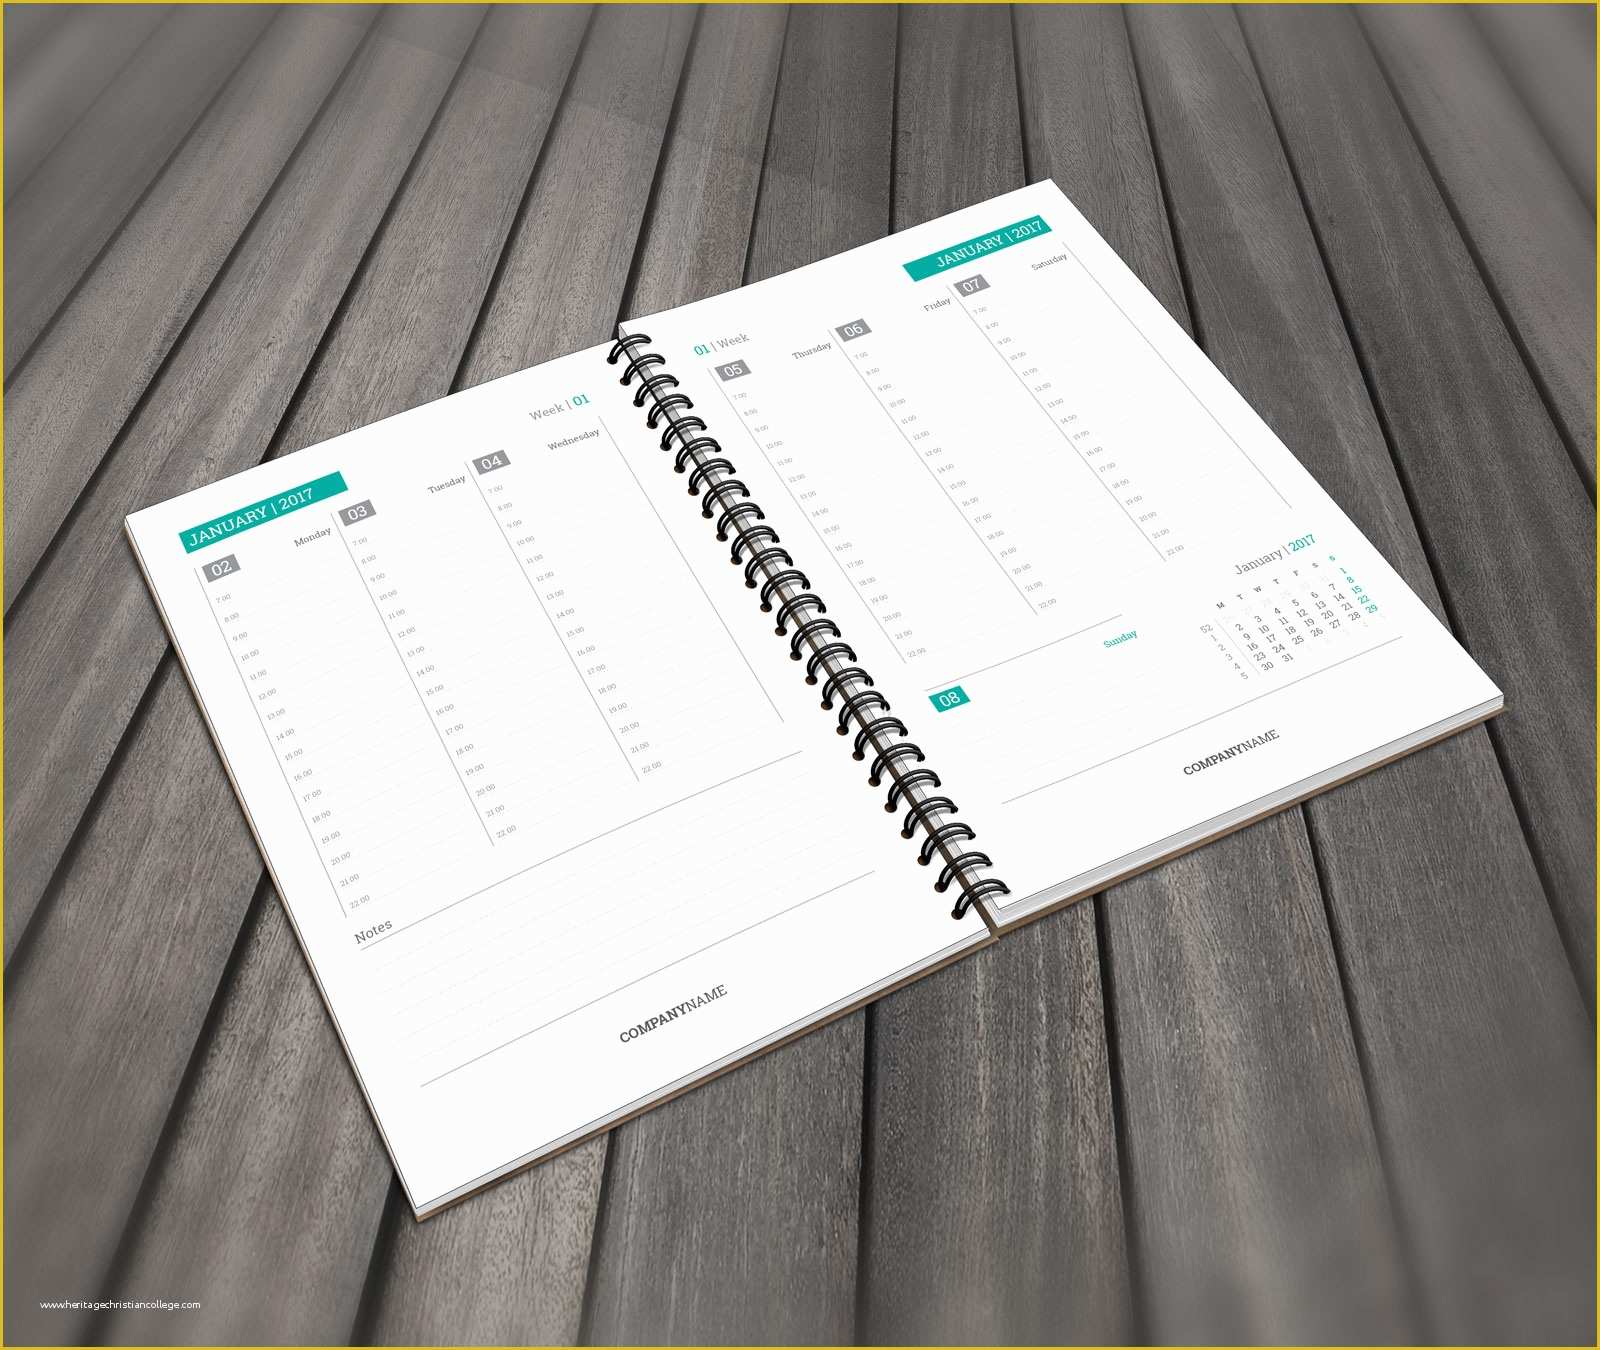 Indesign Planner Template 2018 Free Of Printable Daily Planner Template In Pdf and Indesign